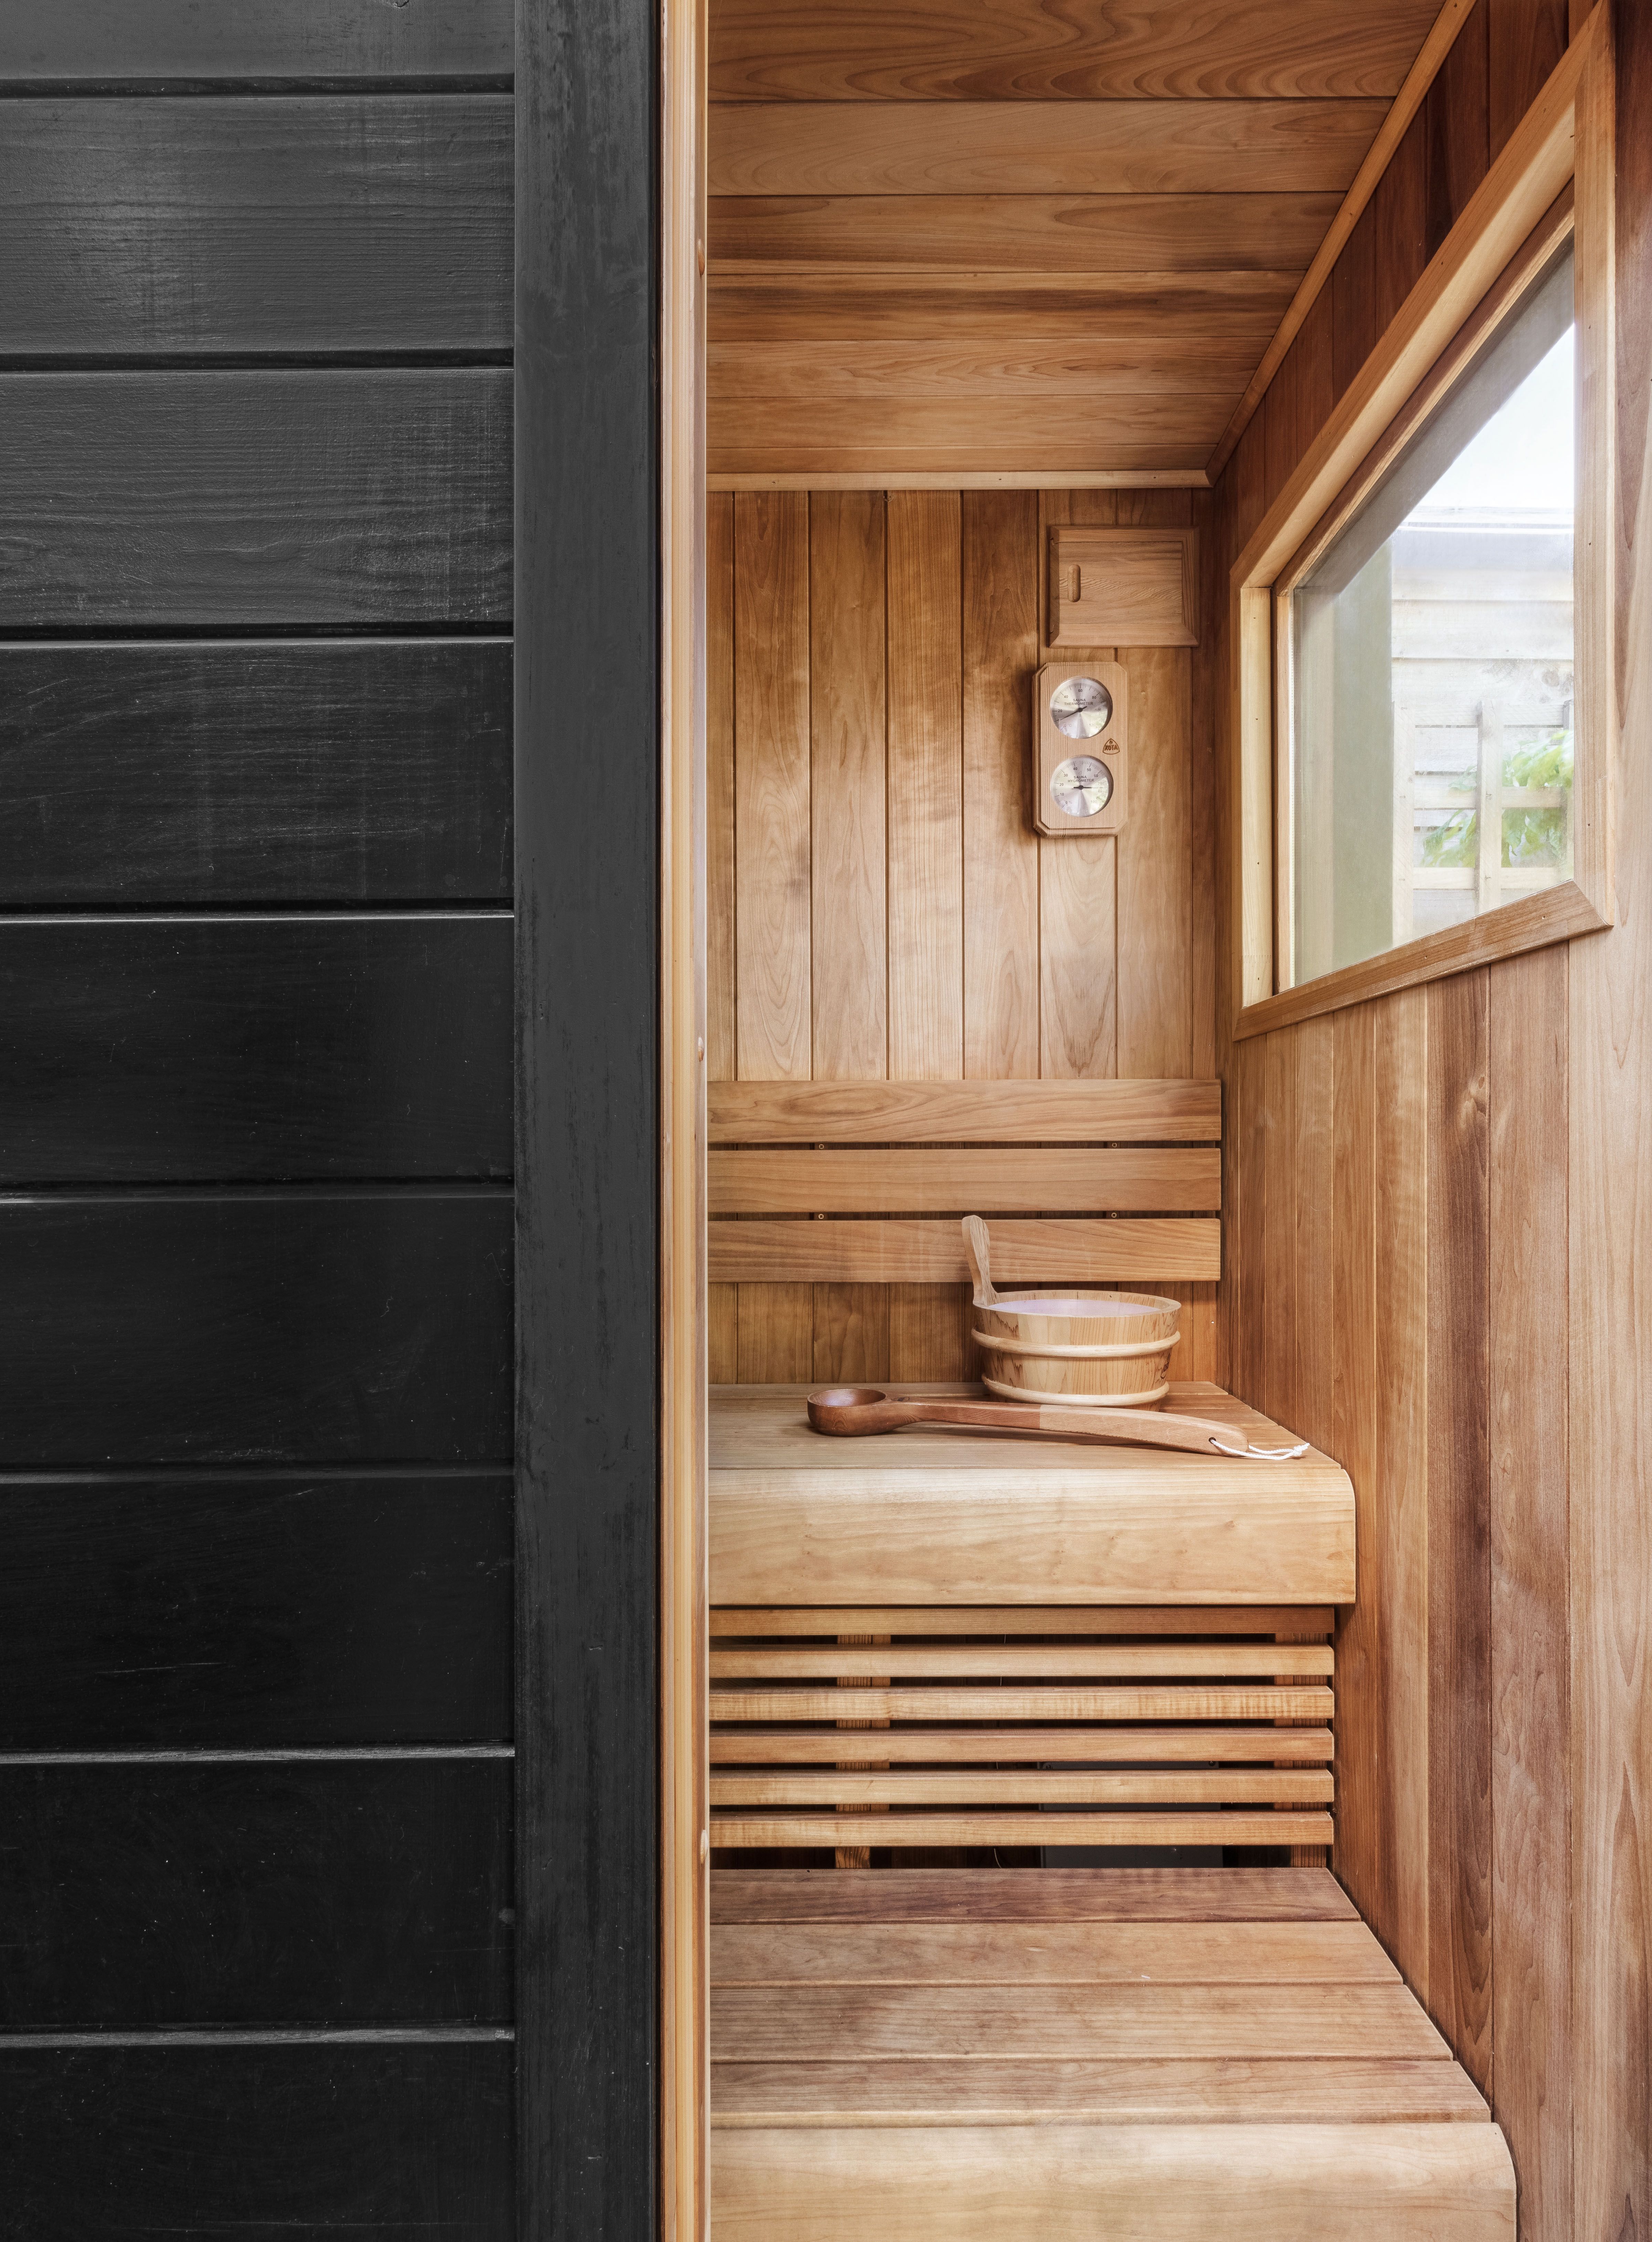 9 Home Sauna Ideas and Tips From Designers